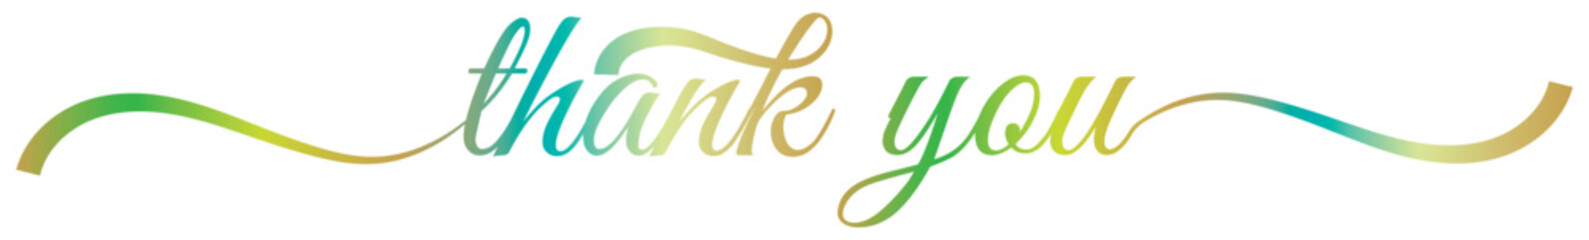 THANK YOU – Calligraphy Rainbow Text Effect Banner on White Background